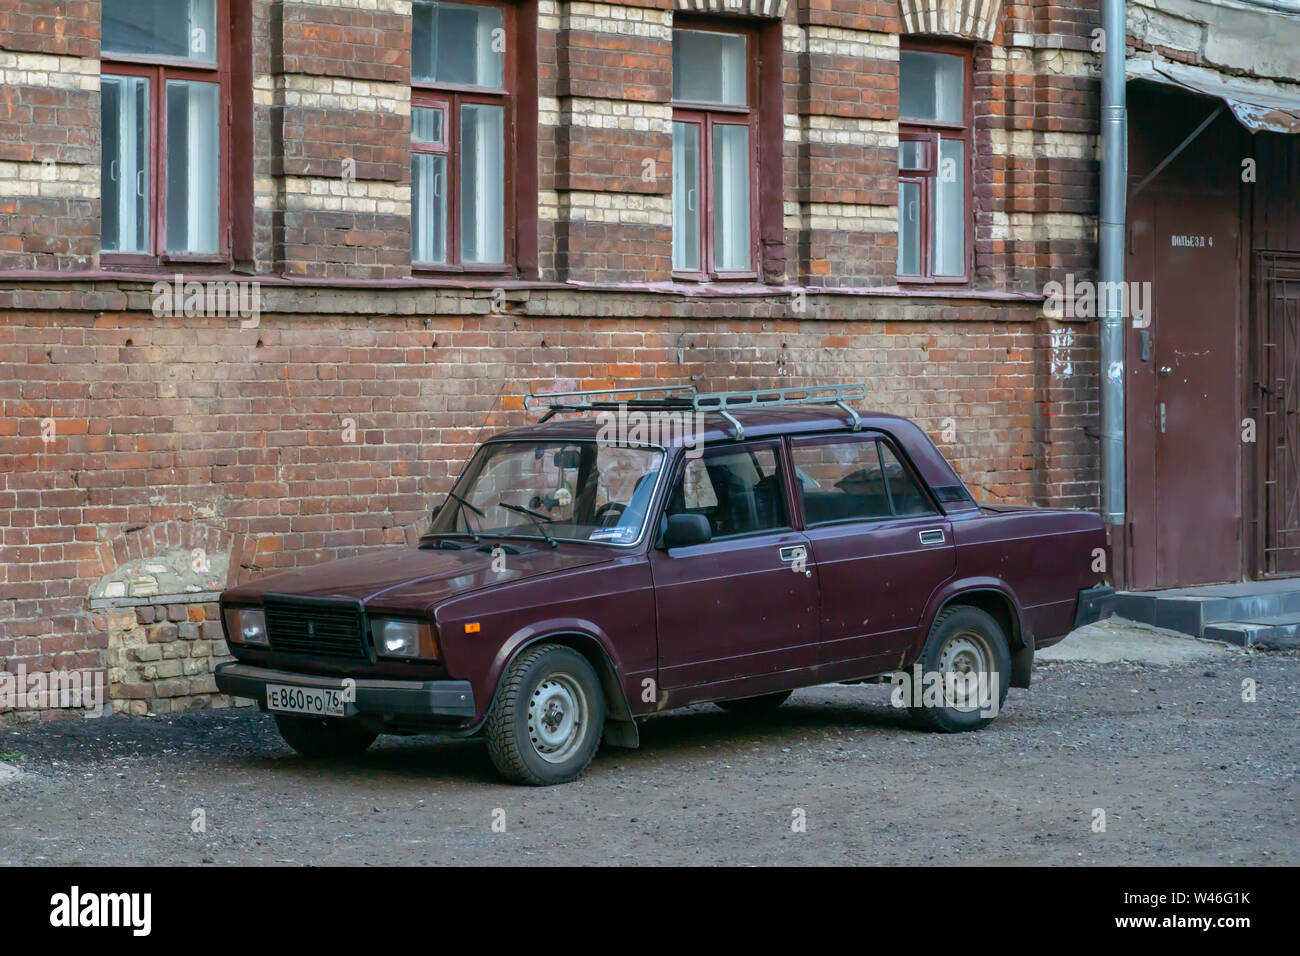 MOSCOW, RUSSIA - APRIL 04, 2019: Red Lada 1200 made in USSR 1960s compact car based on FIAT 124. Soviet Russian old car Stock Photo